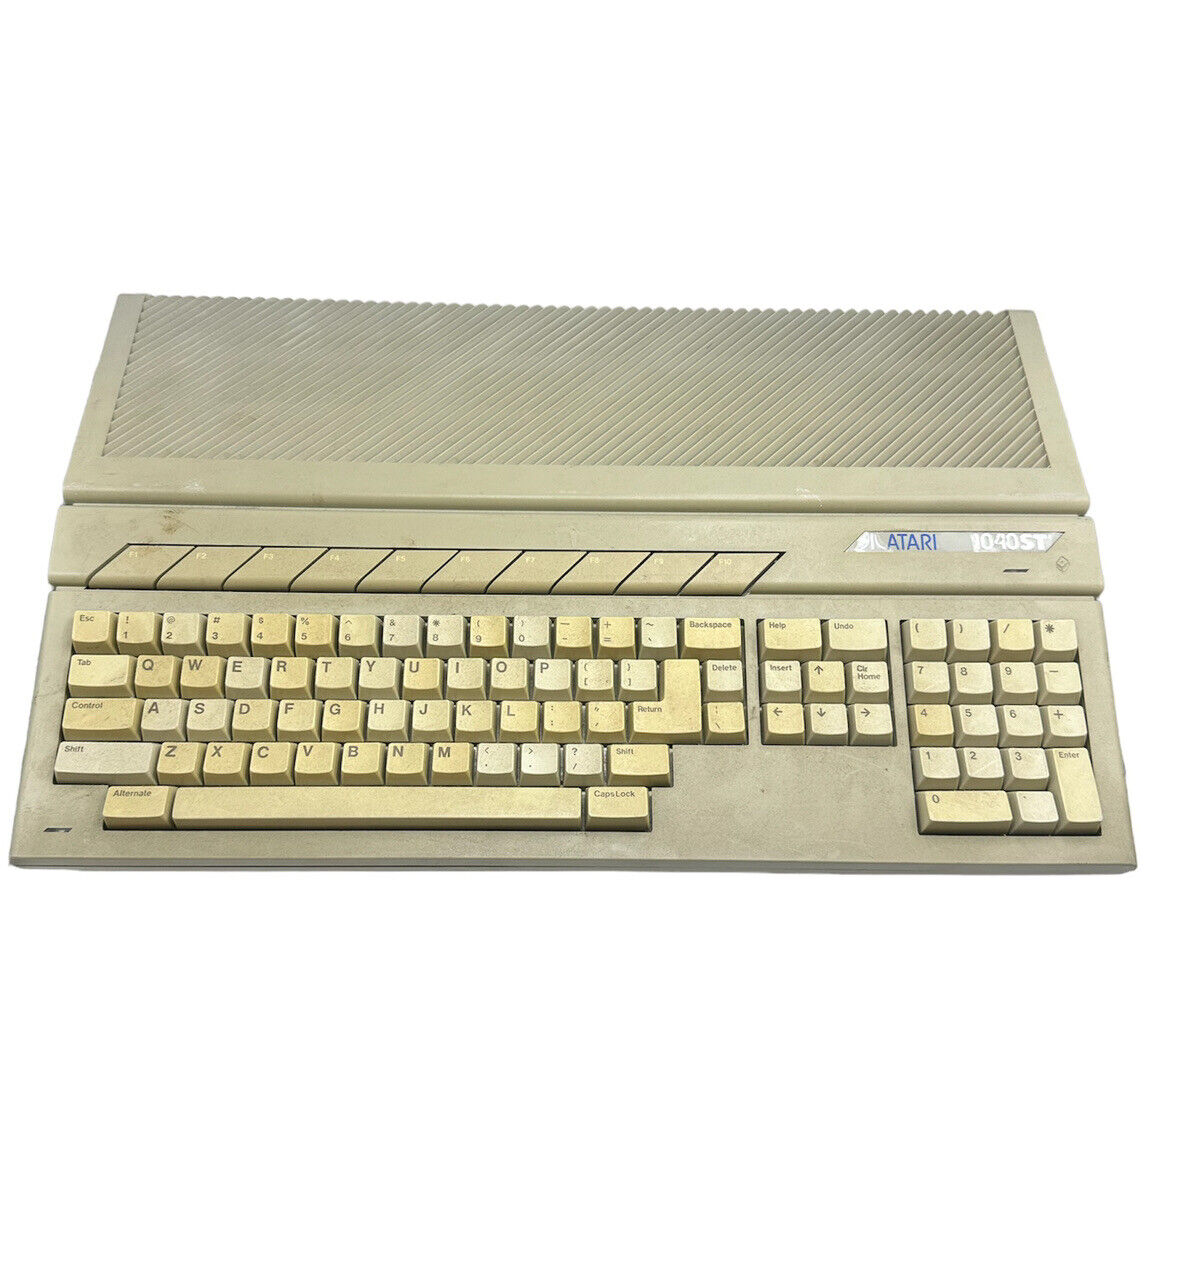 atari 1040ste - computer only (no mouse or monitor Untested)